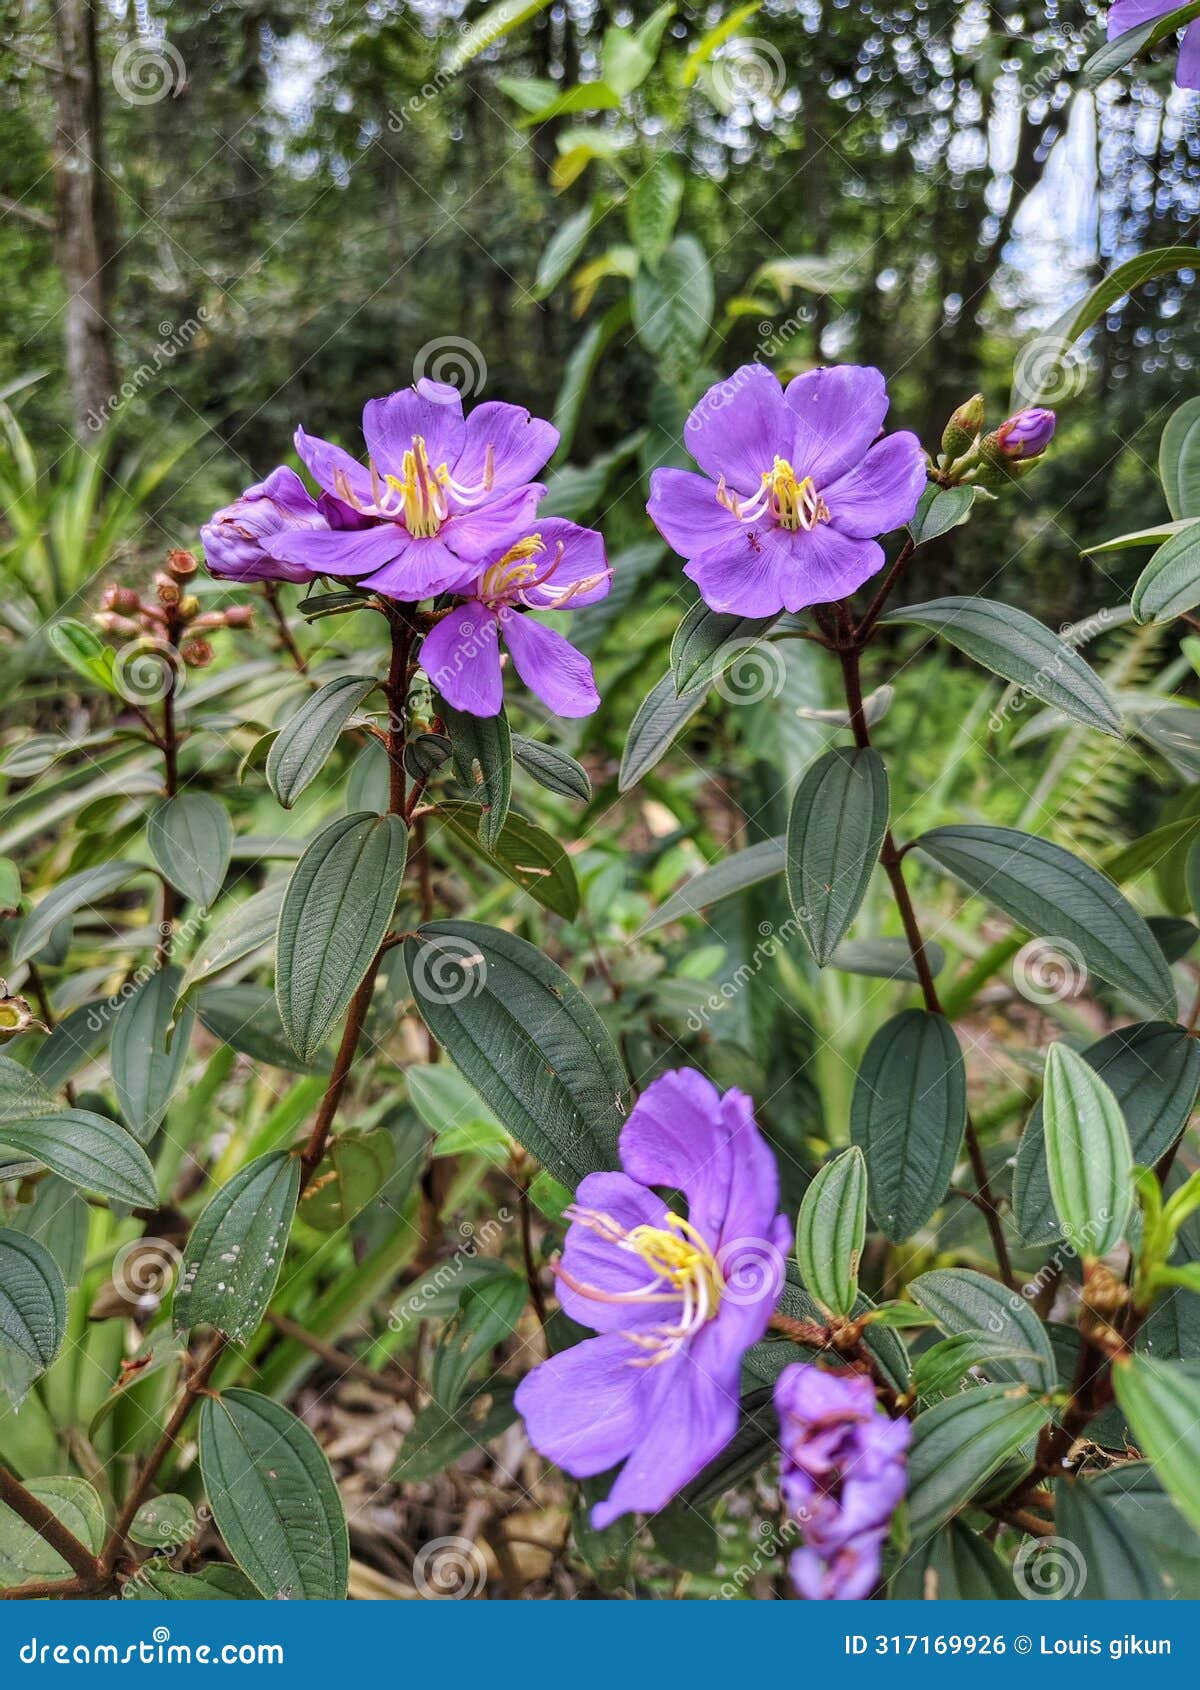 forest flowers are already blooming